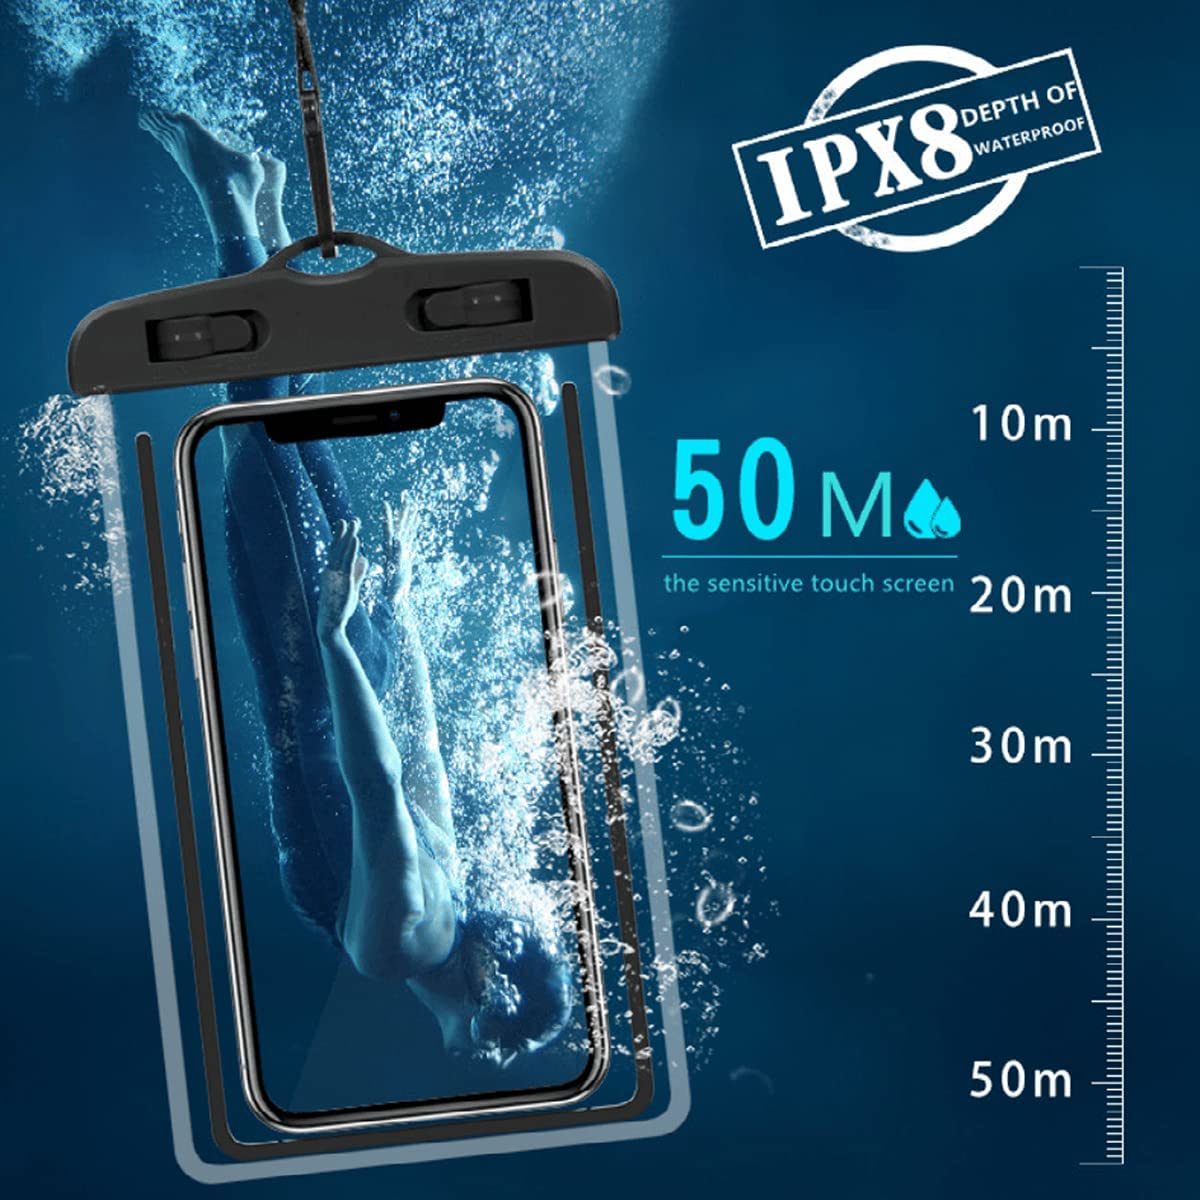 Waterproof Phone Pouch, Universal Waterproof Phone case, Dry Bag Outdoor Beach Bag for iPhone 12 11 8 7 Pro Max SE XR/Samsung Galaxy s21 Note 20/Google Pixel/Moto G7/Oneplus/LG, Samsung (Blue)